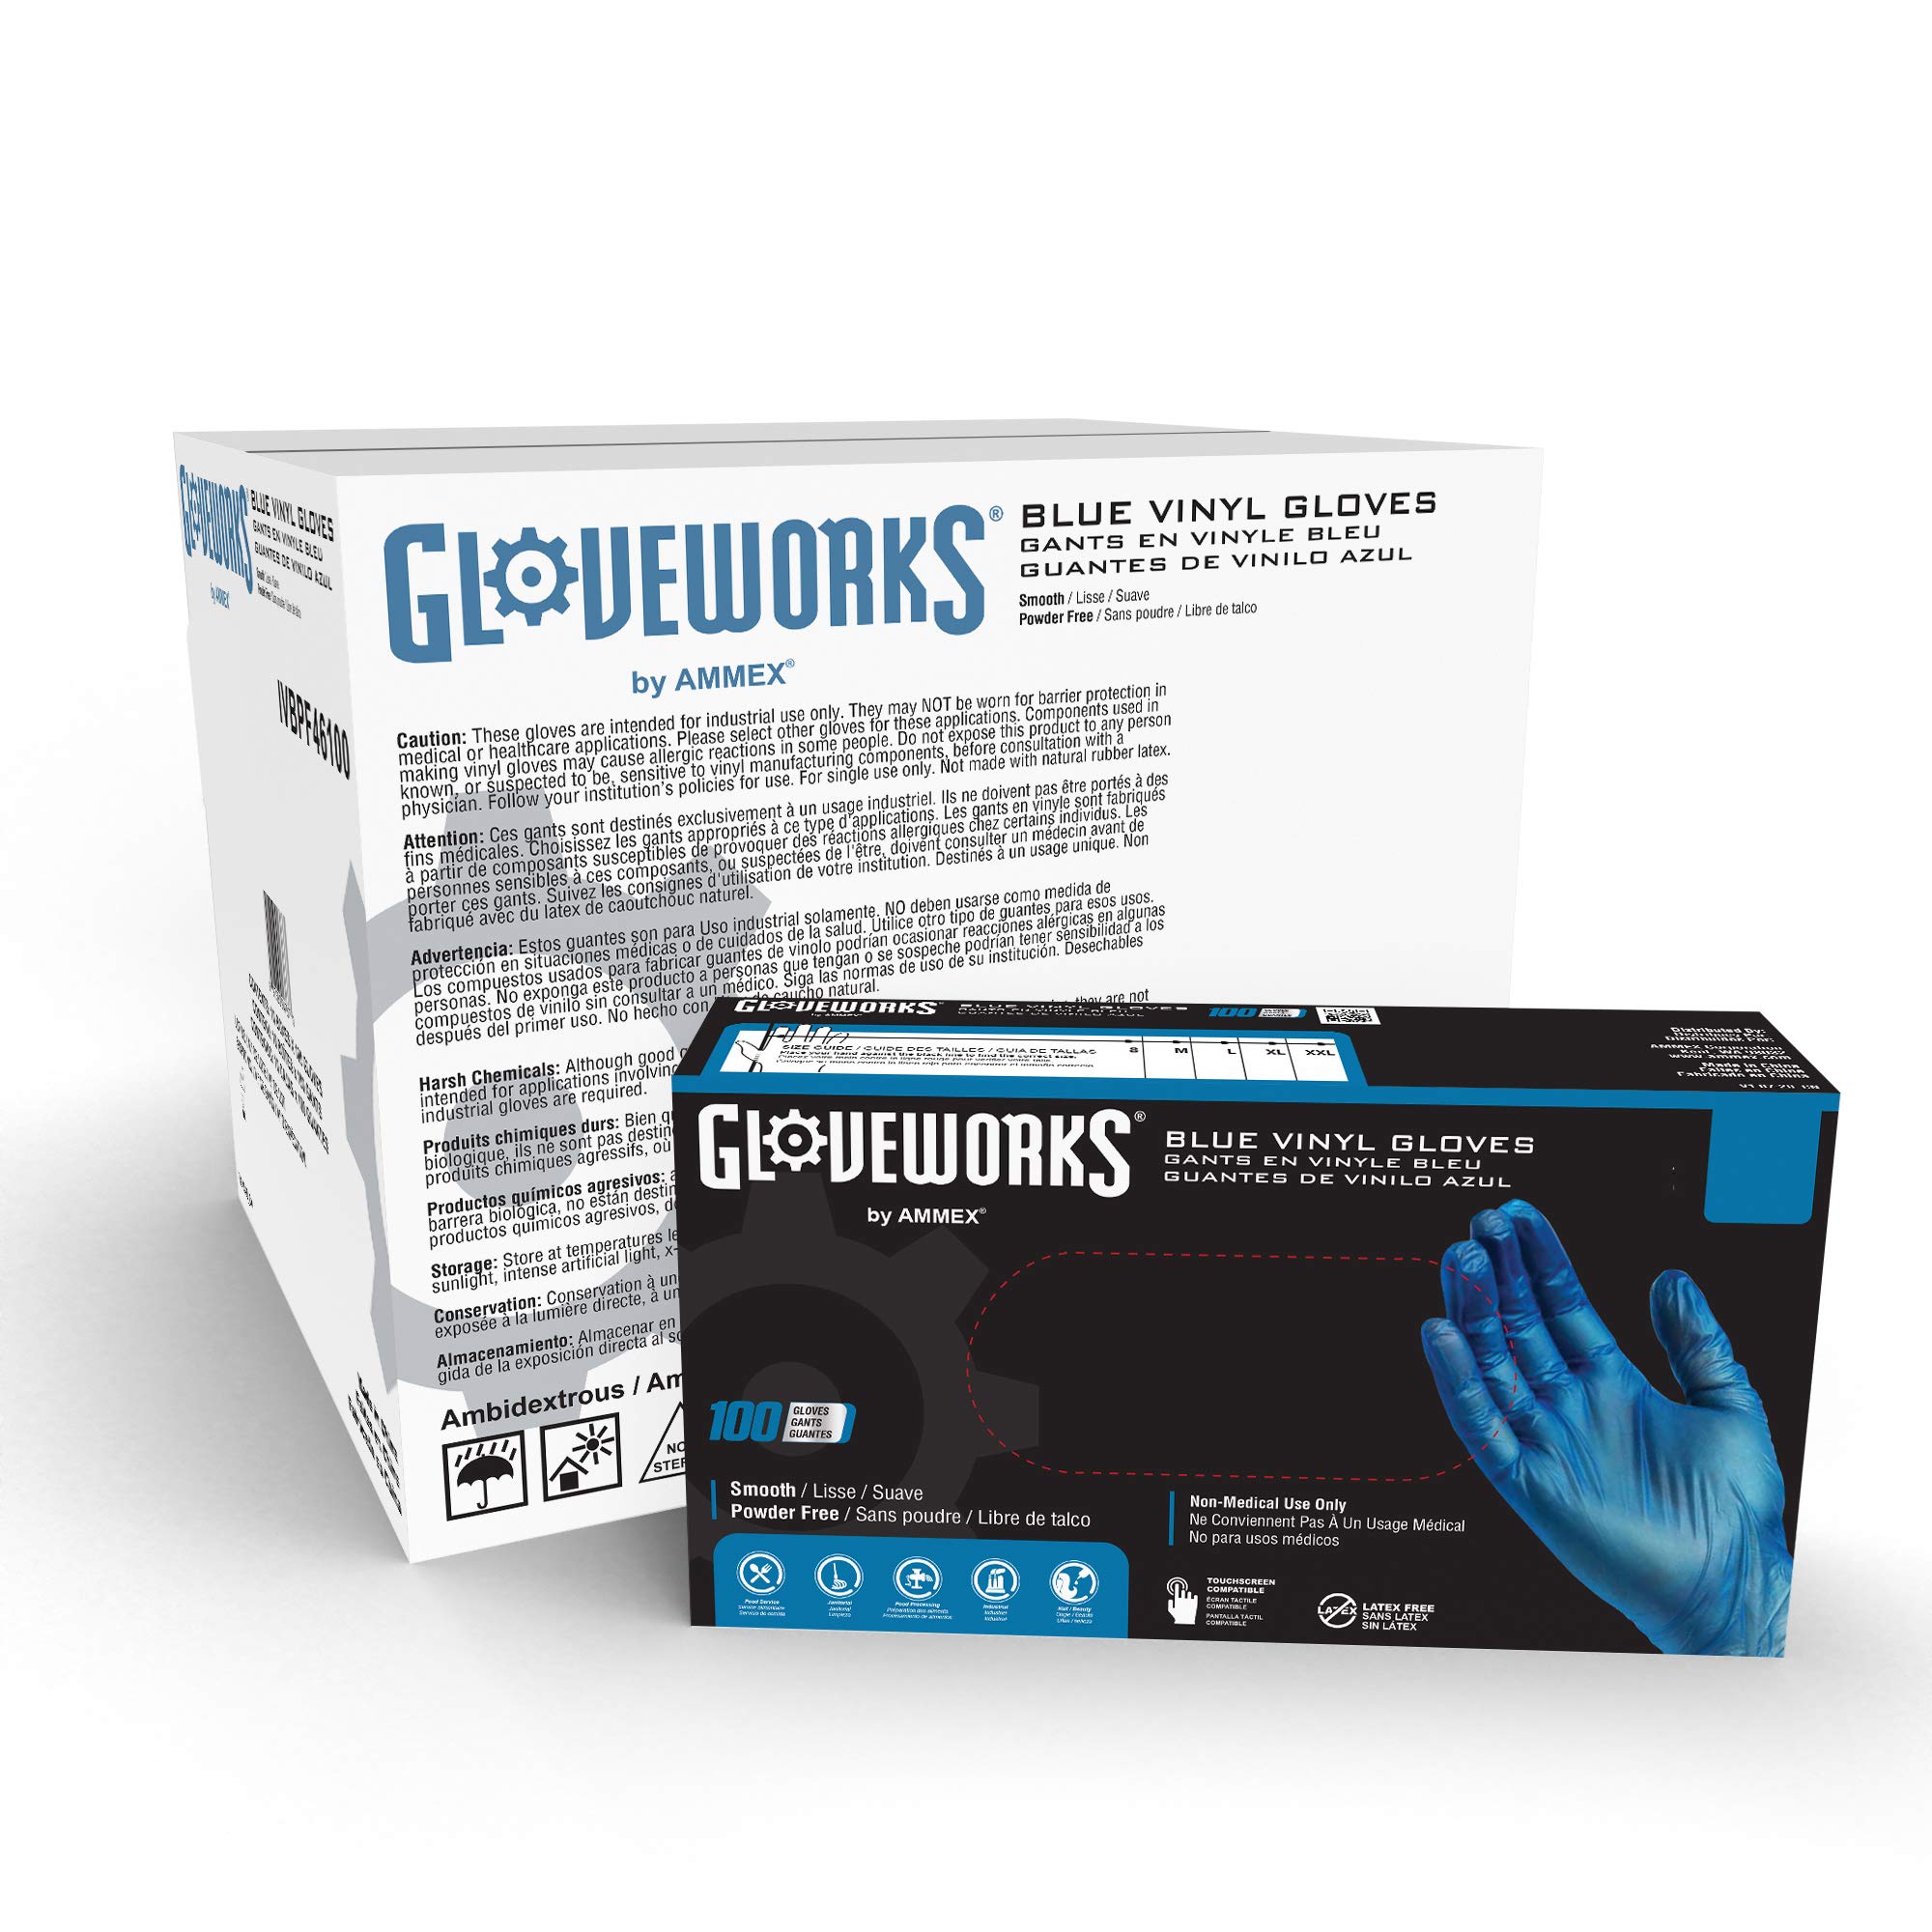 GLOVEWORKS Blue Vinyl Industrial Gloves, Case of 1000, 3 Mil, Size Large, Latex Free, Powder Free, Food Safe, Disposable, Non-Sterile, IVBPF46100